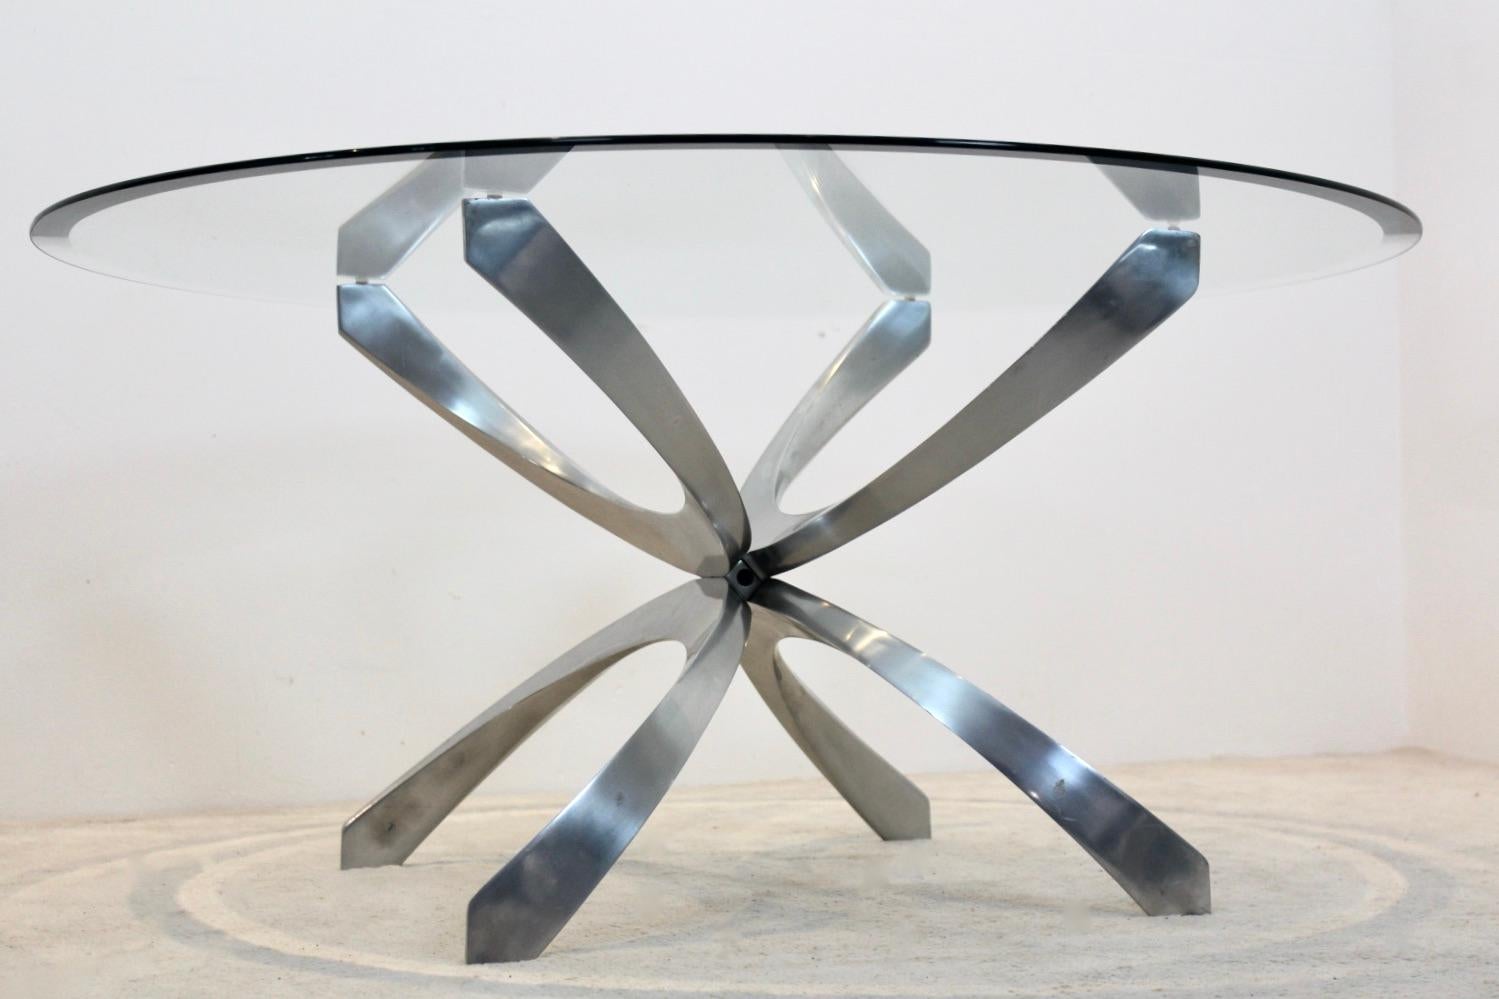 20th Century Modernist Sculptural Aluminum and Glass Coffee Table by Knut Hesterberg, 1970s For Sale